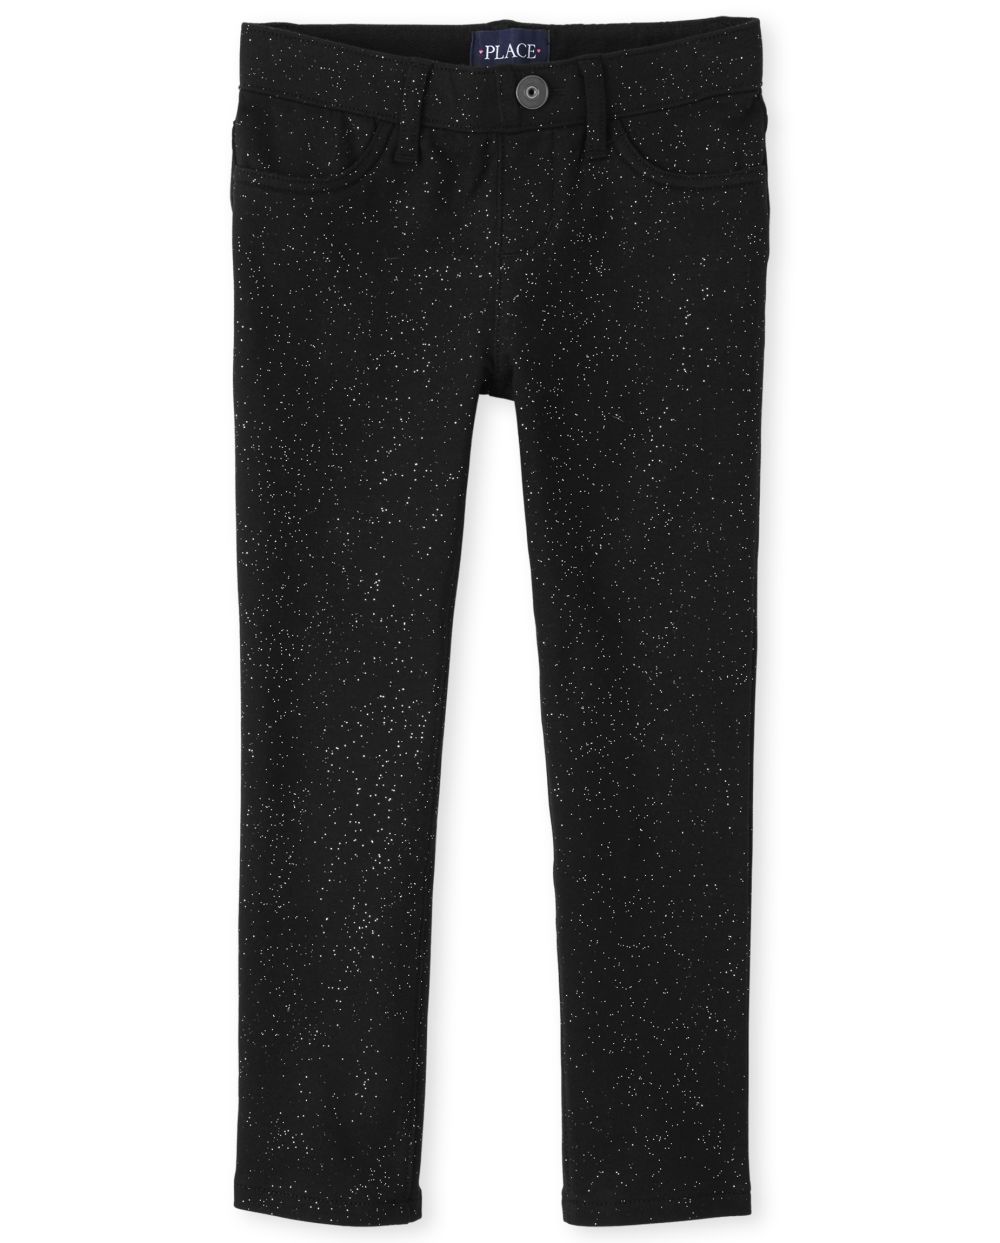 Girls Glitter French Terry Pull On Jeggings